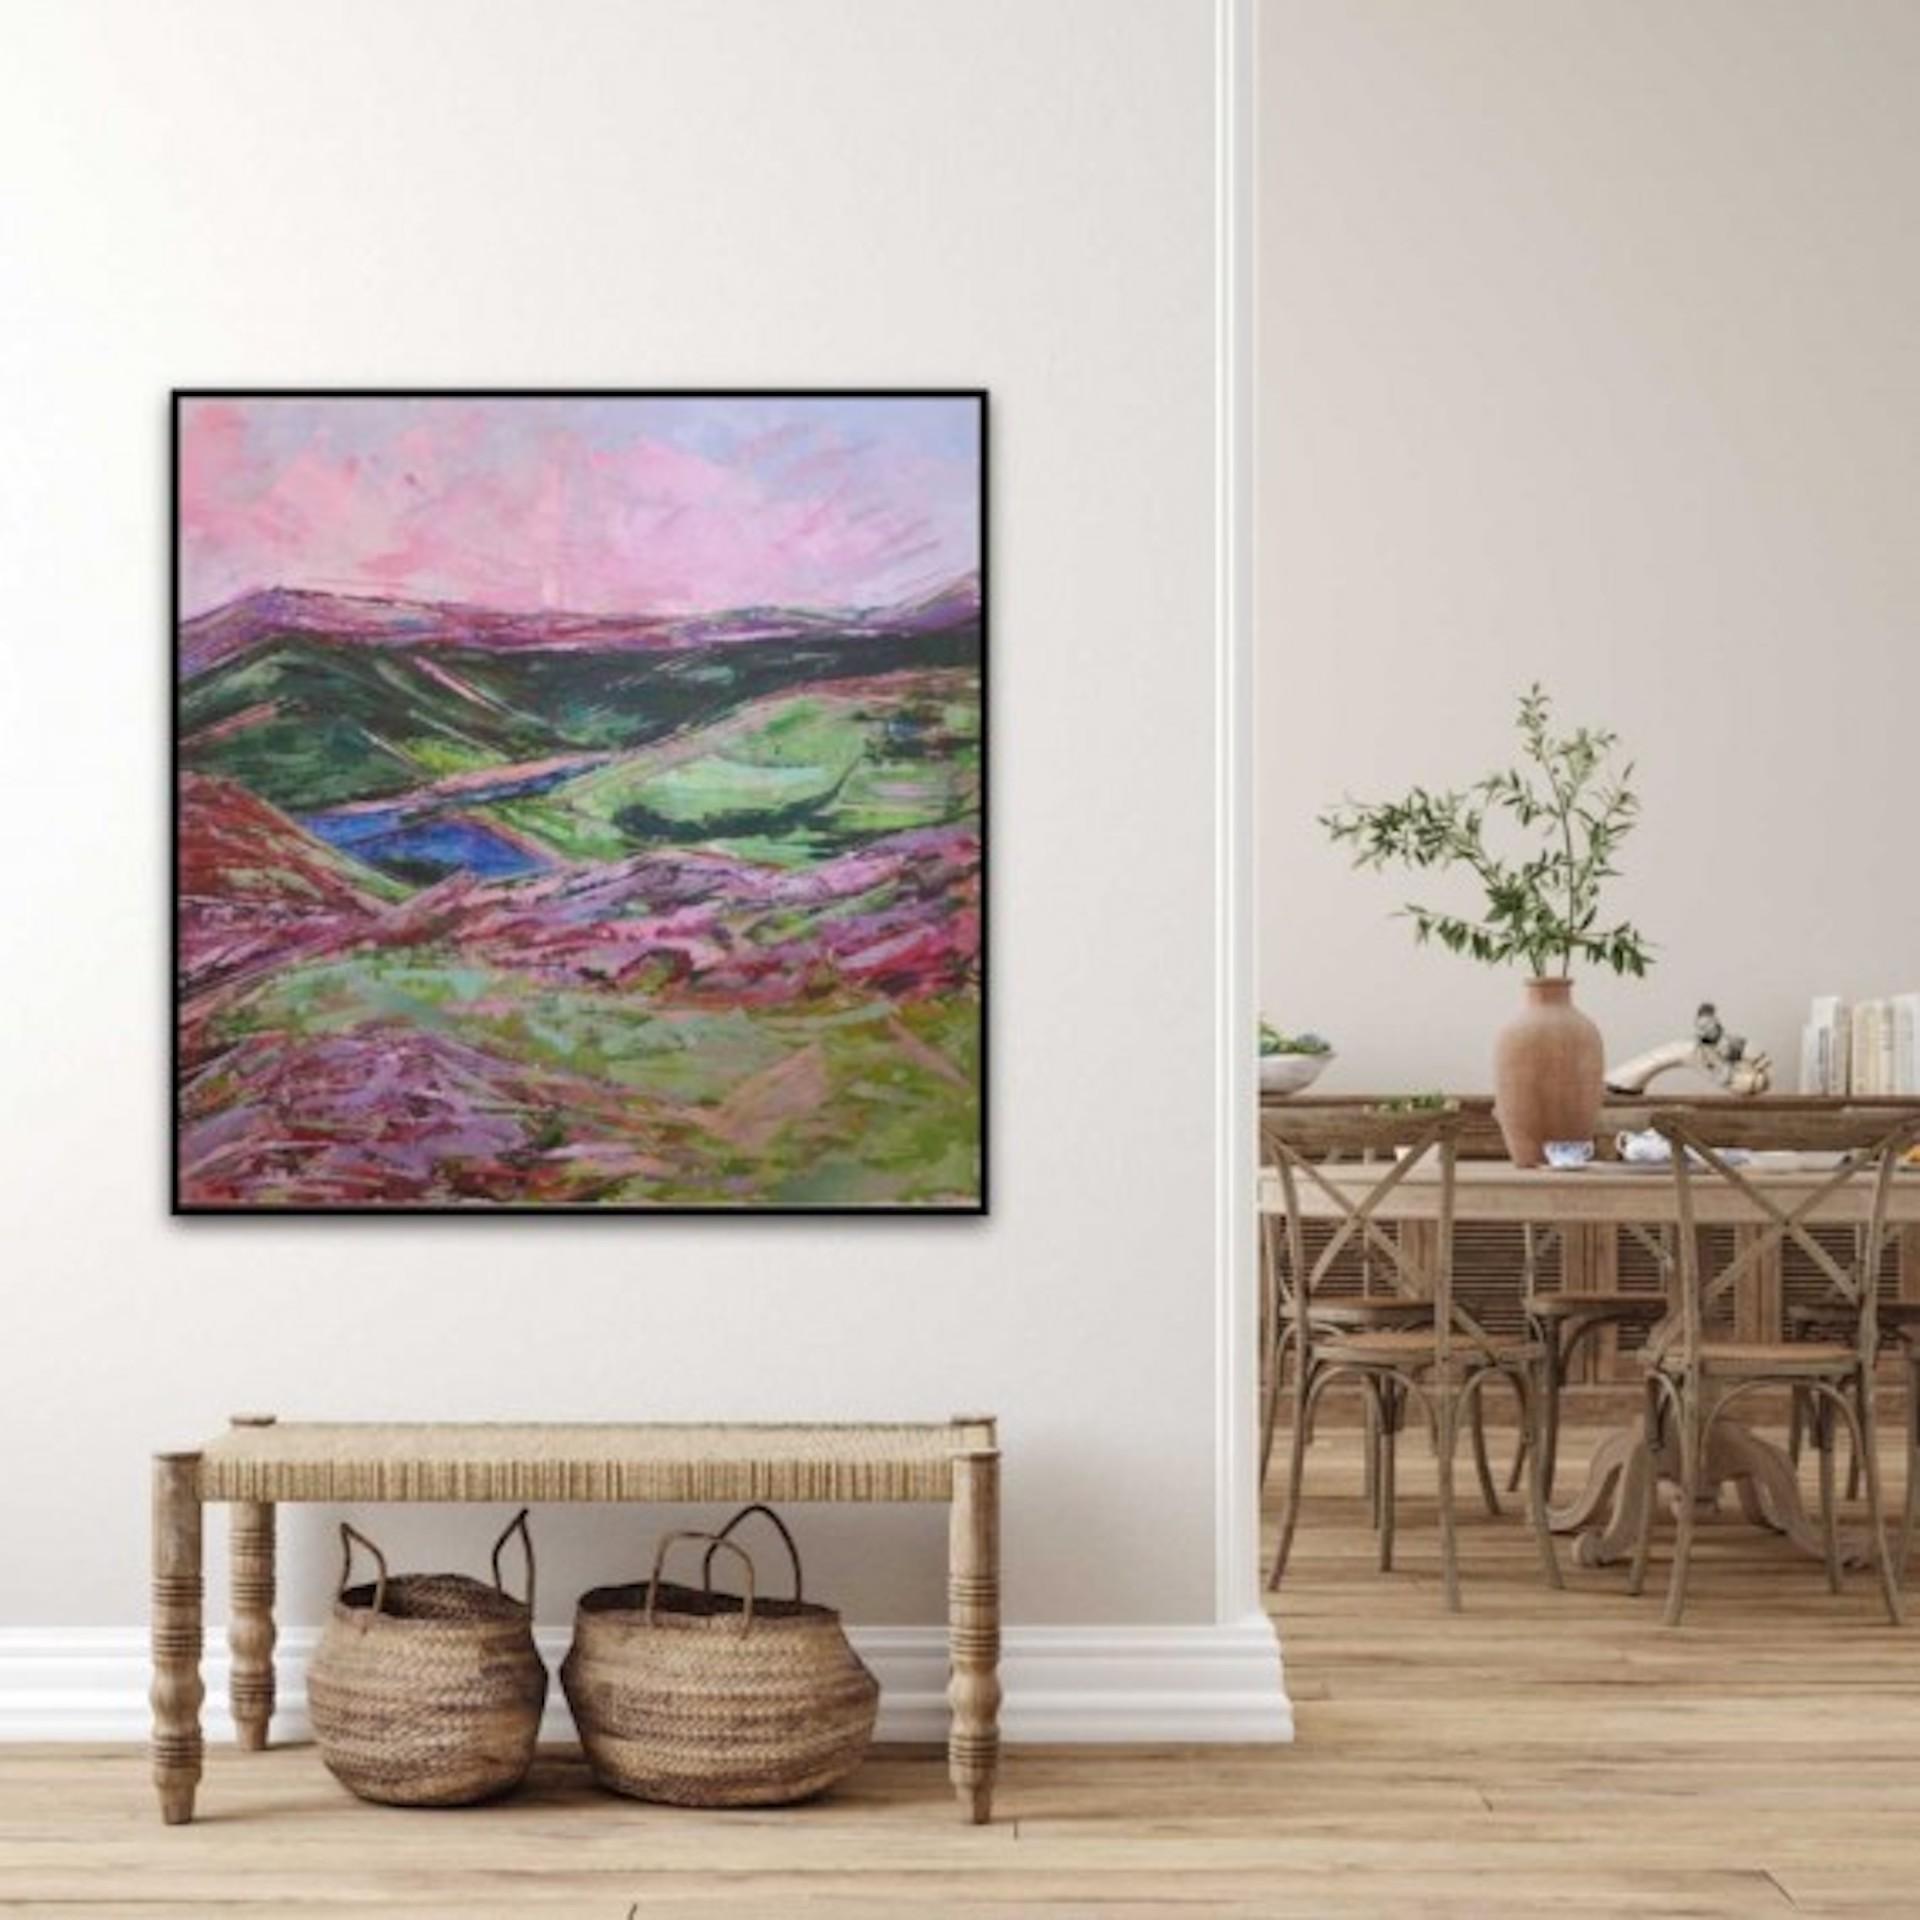 Lake District [2021]
Original
Landscapes 
Acrylic, Oil and pastels on Canvas
Image size: H:100 cm x W:100 cm
Complete Size of Unframed Work: H:100 cm x W:100 cm x D:1.5cm
Sold Unframed
Please note that insitu images are purely an indication of how a